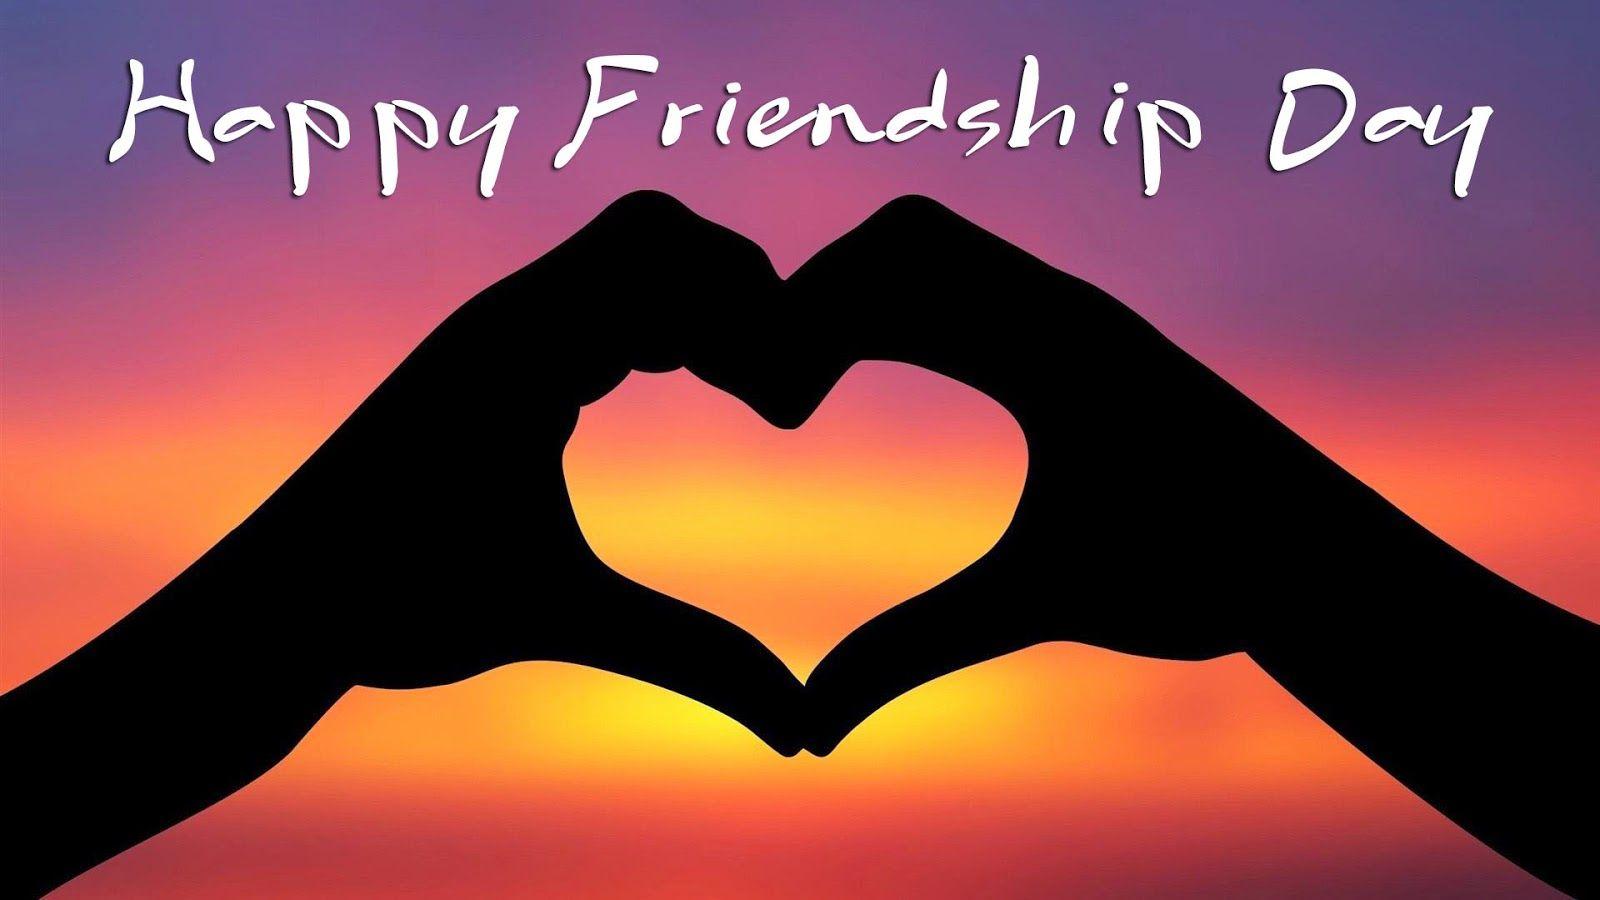 International Friendship Day Images  HD Wallpapers for Free Download  Online Wish Happy Friendship Day 2020 With WhatsApp Stickers and GIF  Greetings   LatestLY